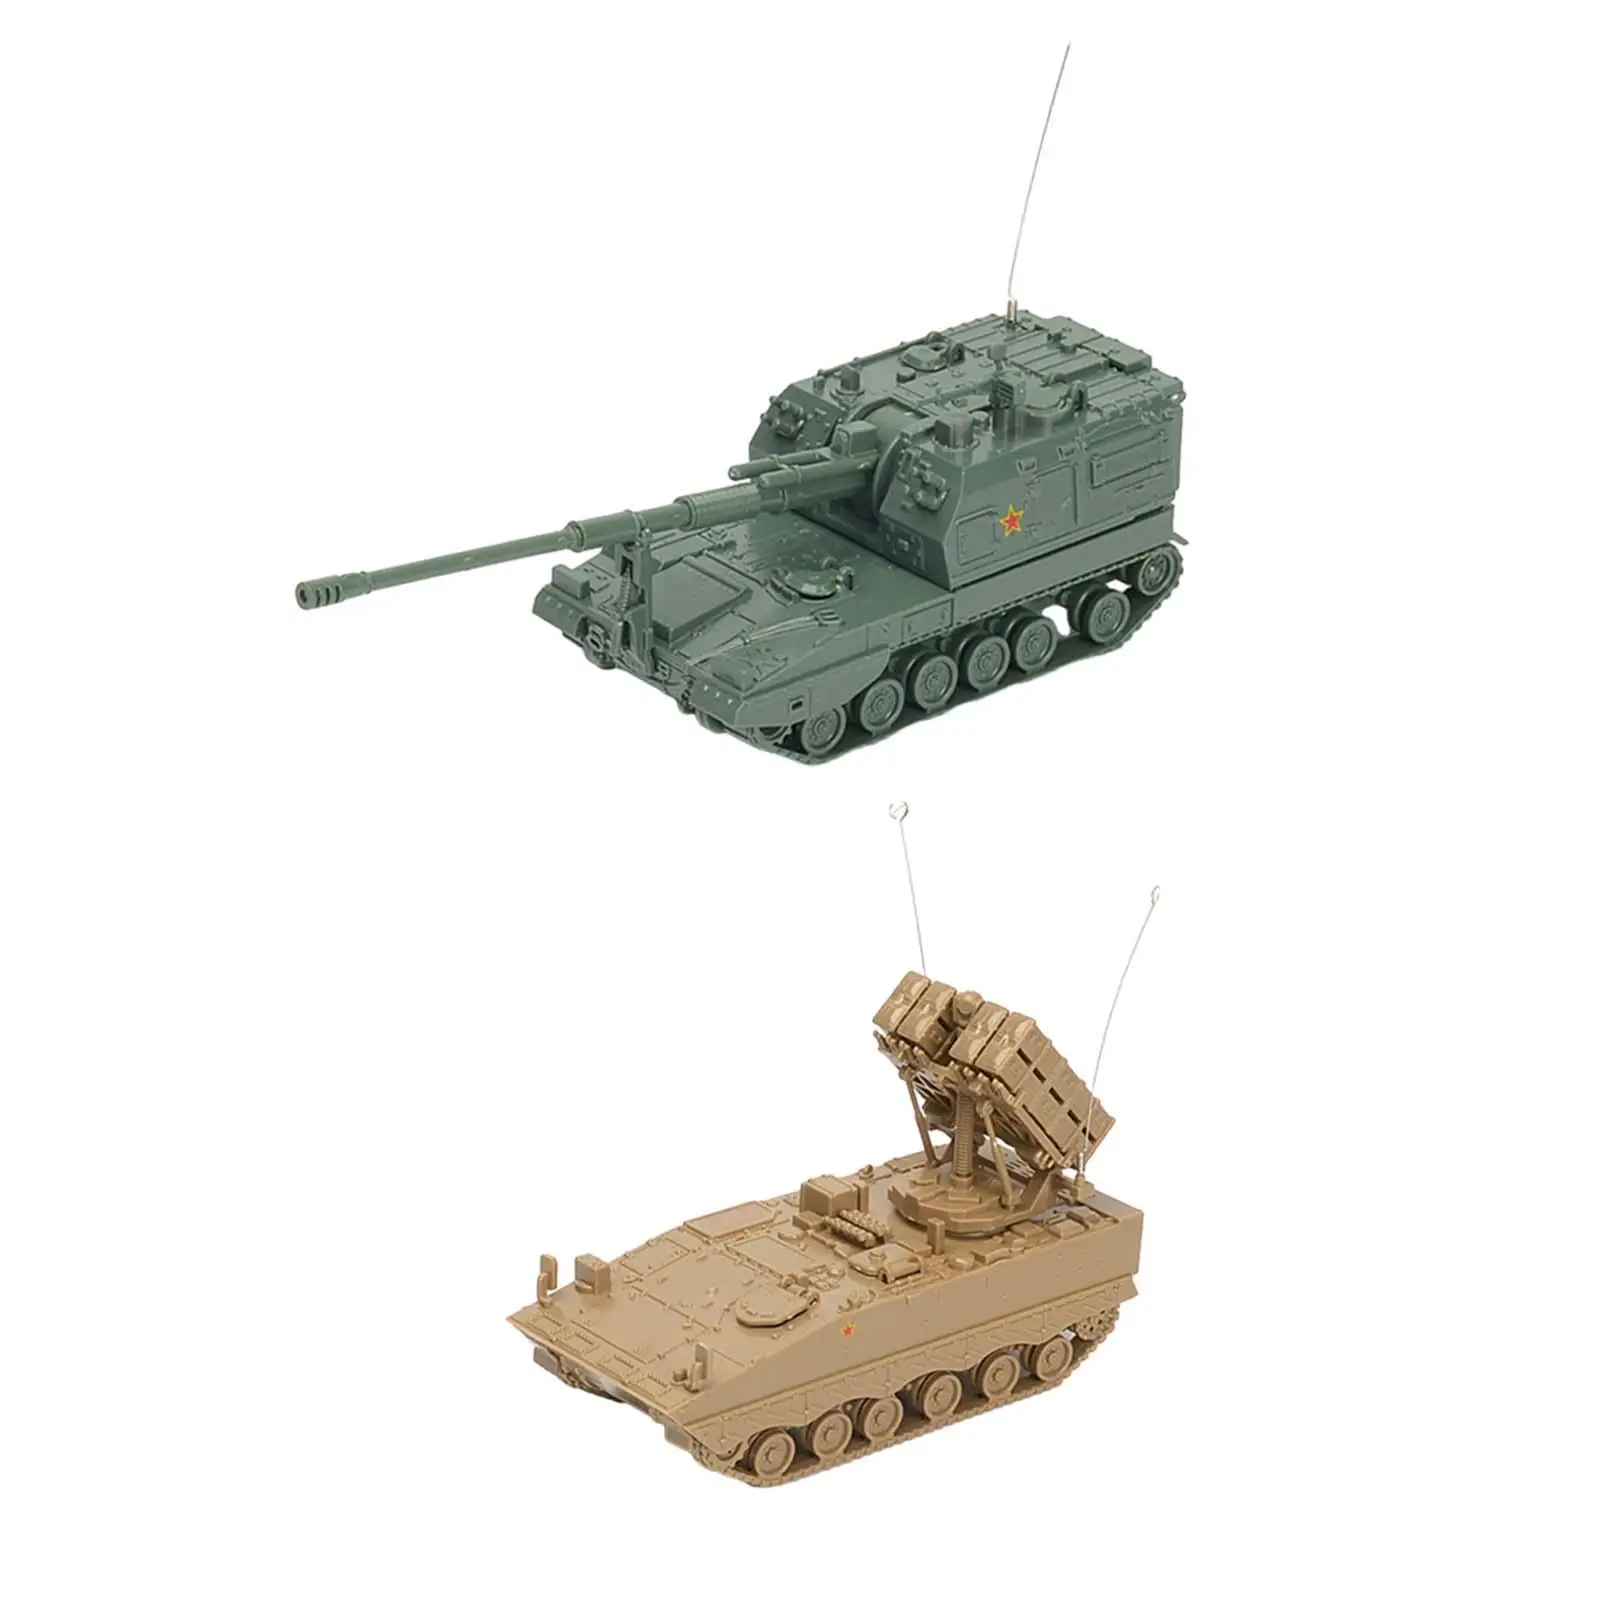 1/72 Scale Puzzles Building Model Kits Assembled Tank Model Armored Tank Model for Collectibles Adults Boys Kids Tabletop Decor